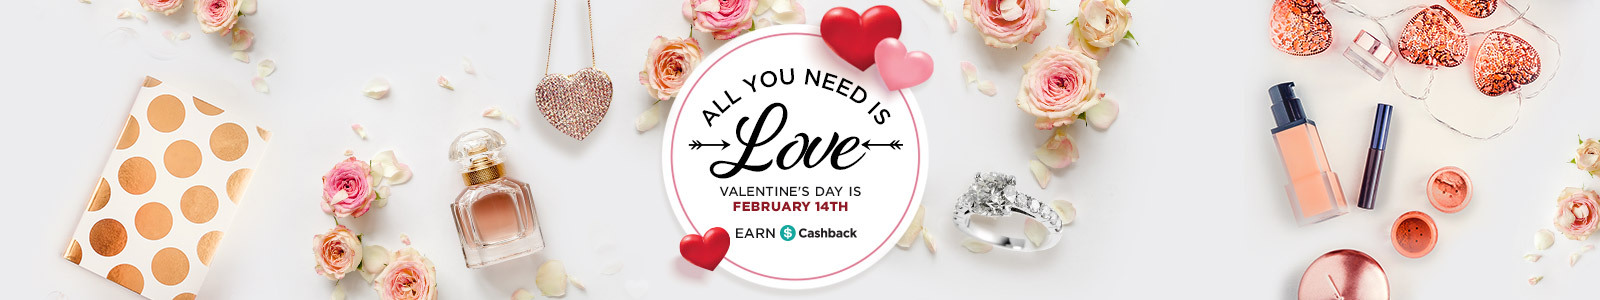 Valentine’s Day gifts for everyone | SHOP.COM